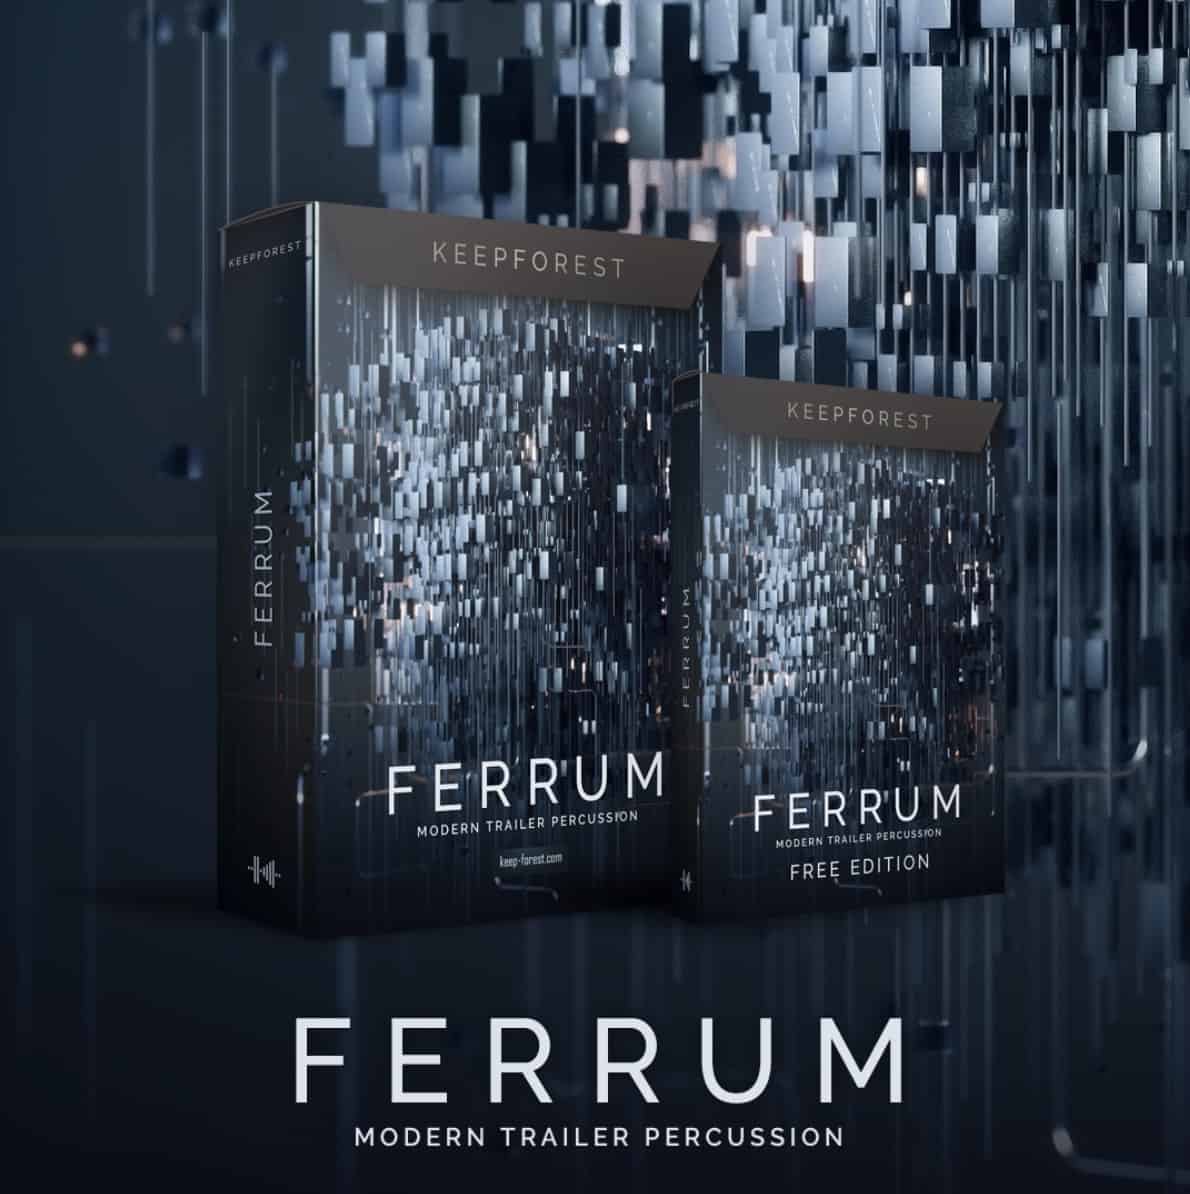 Keepforests Ferrum Modern Trailer Percussion Available for Pre Order